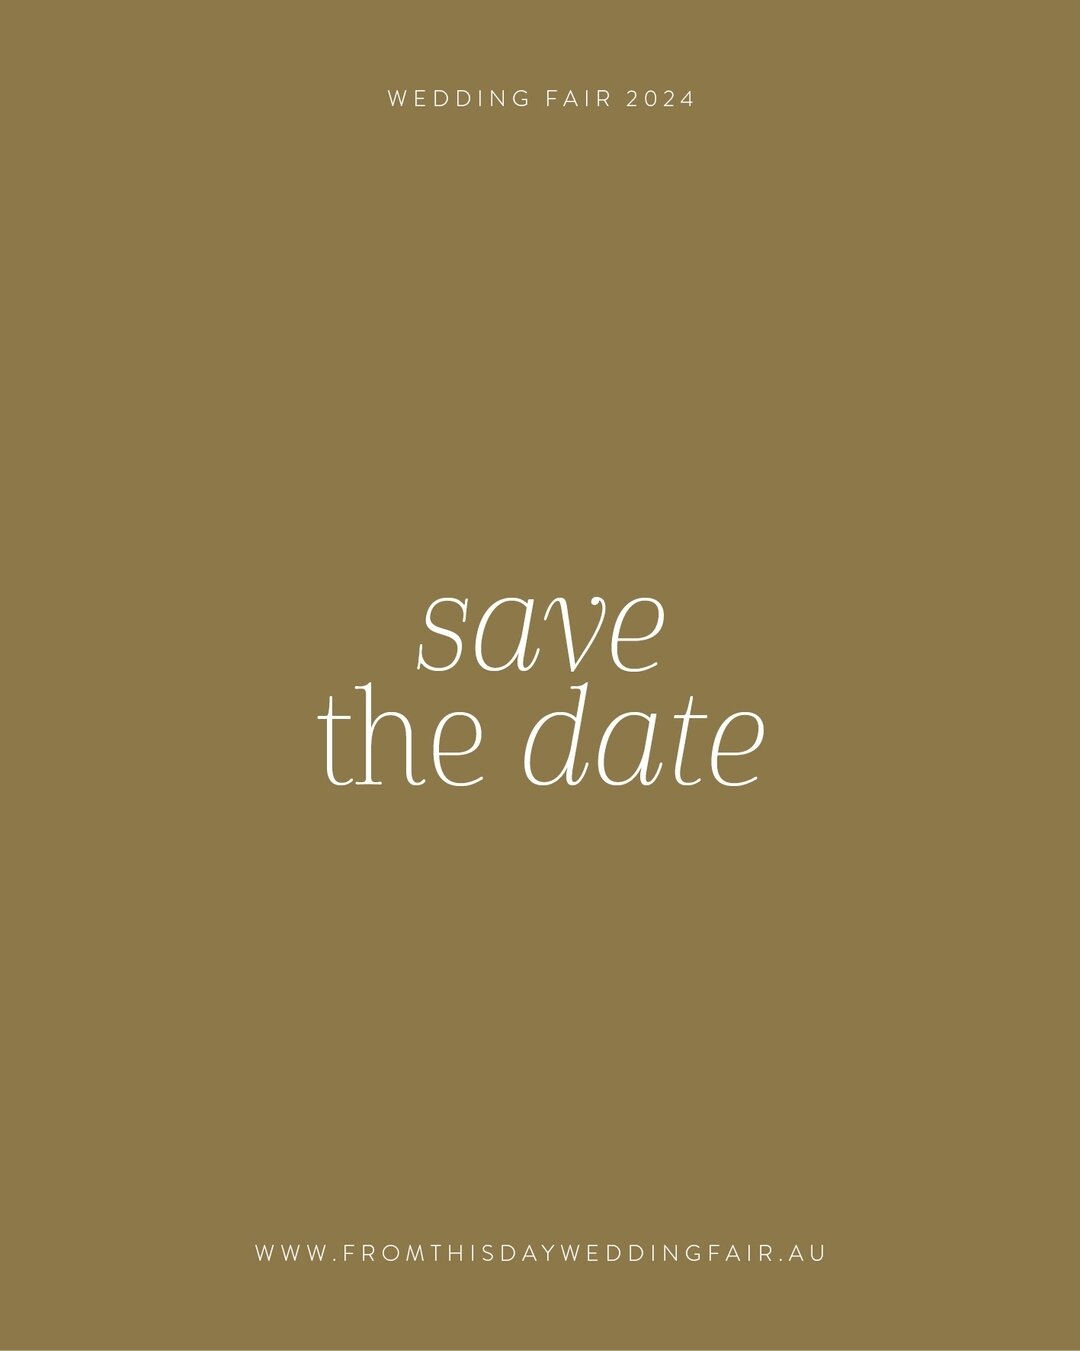 🎀 Save the Date 🎀 From This Day Wedding Fair 2024

🎀 Sunday 27 October
🎀 Sabina River Farm
🎀 12:00pm - 3:00pm
🎀 Free Tickets available via link in bio
🎀 Food, drinks, live music, heaps of wedding inspo and local vendors

We can't wait to see y